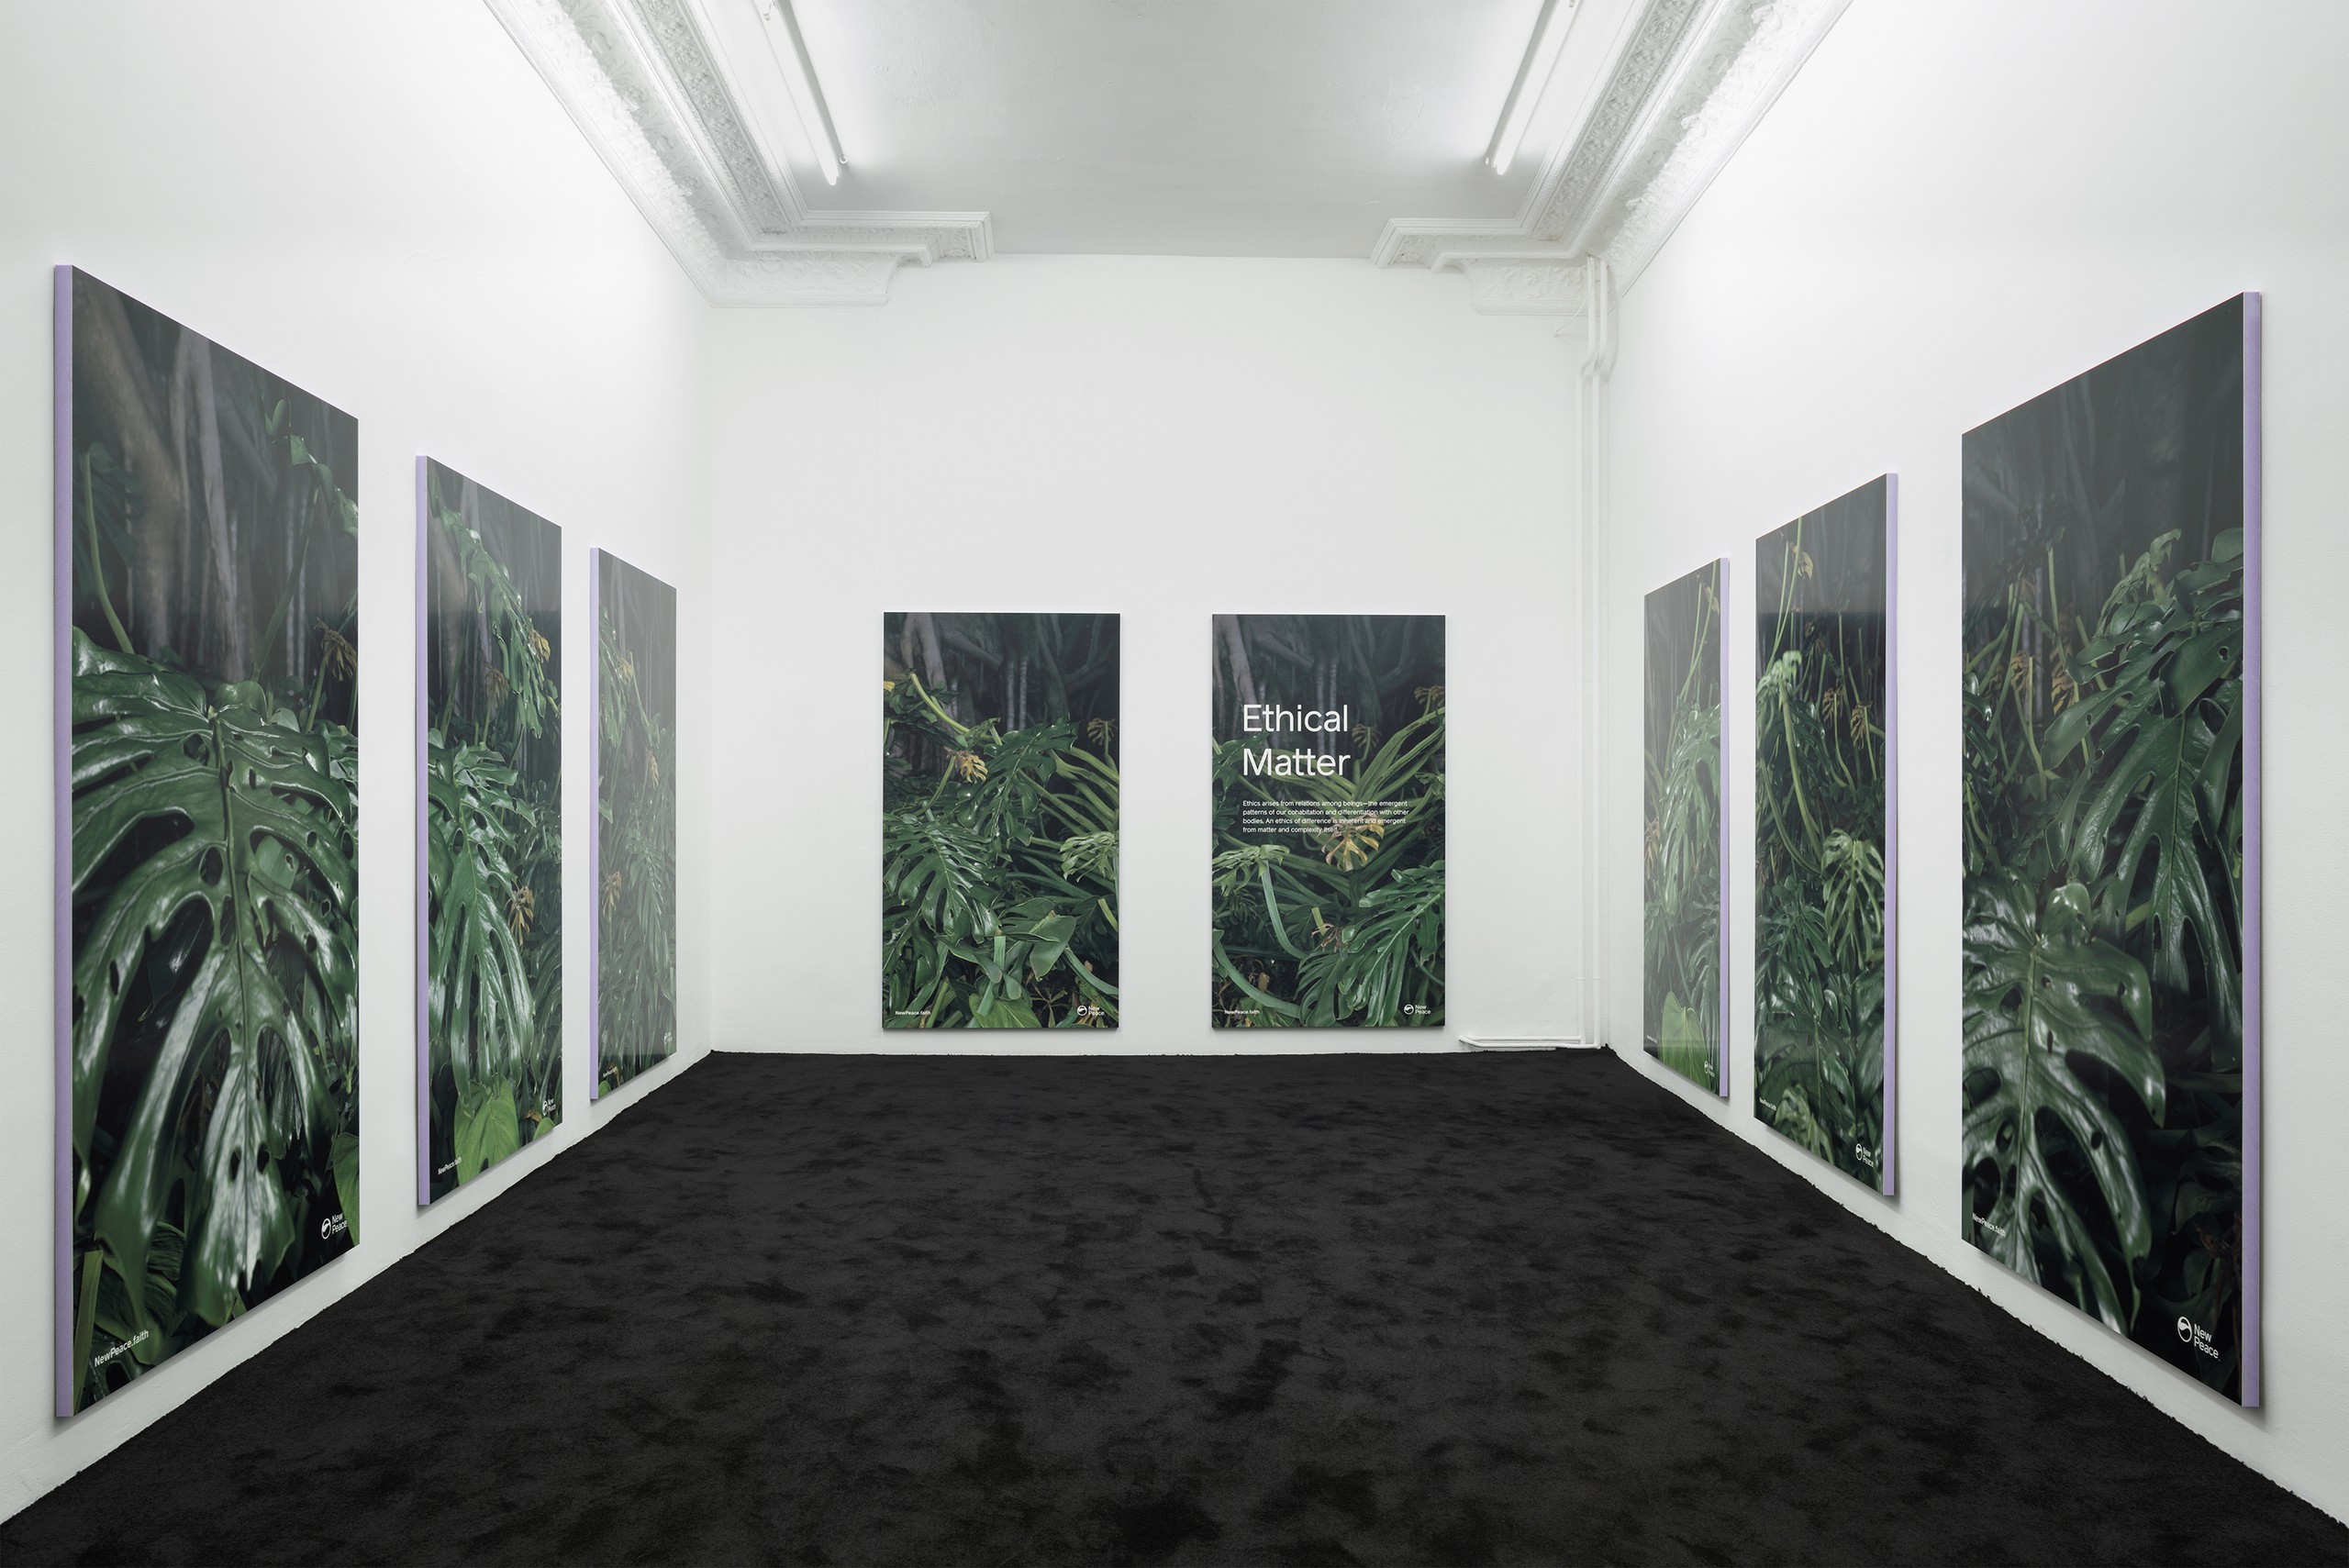 Installation view, Campaign for A New Protocol, Part I, Société, Berlin, 2018